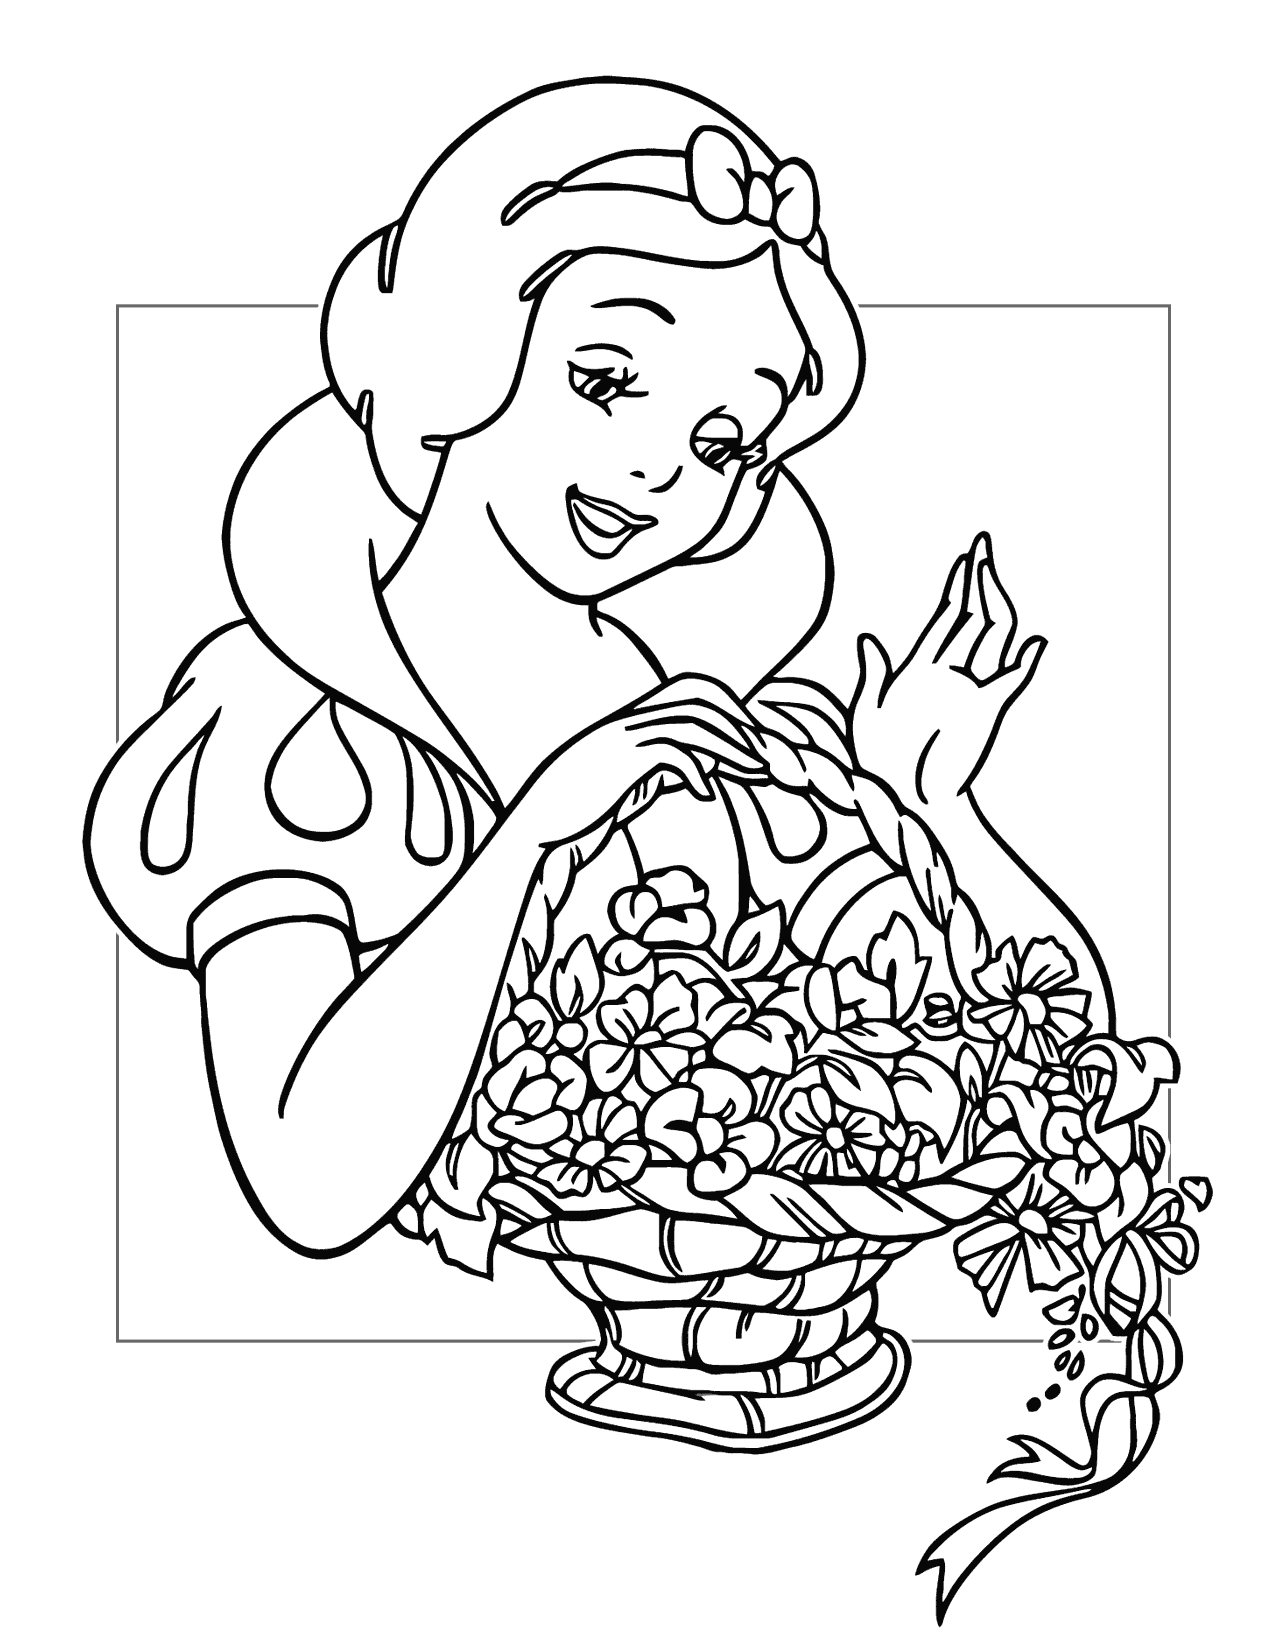 Snow Whites Flowers Coloring Page